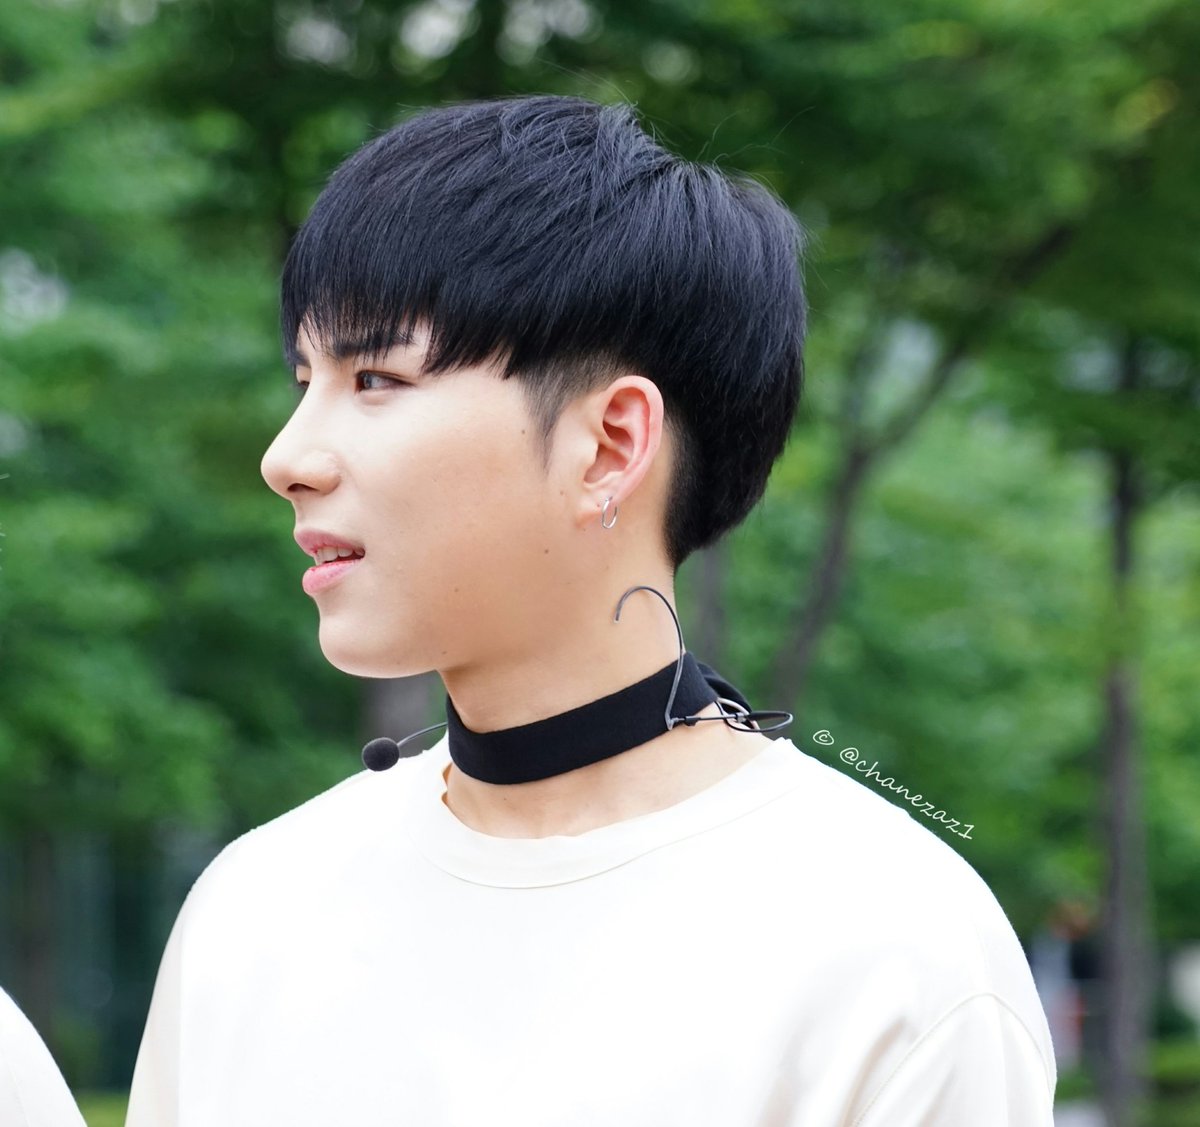 kim sehyoon + side profile + choker = nora not being able to breathe properly